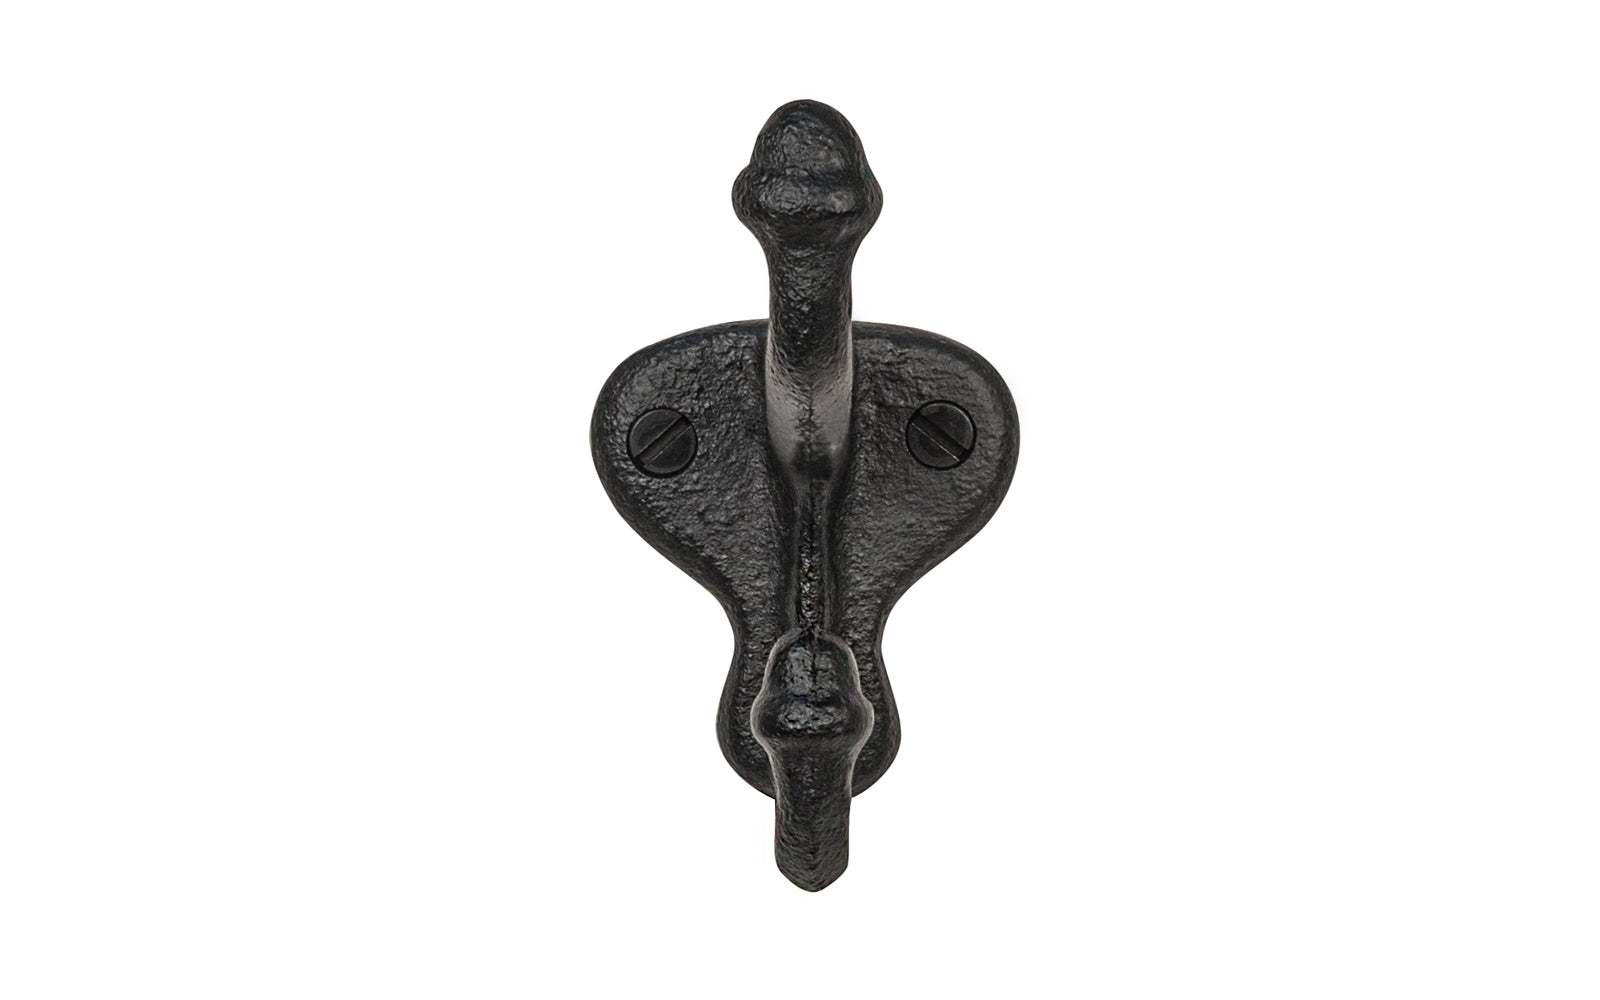 Charming vintage-style "schoolhouse" style black cast iron hook. Excellent for use in hallways, hall trees, kitchens, bedrooms, & other places. The double hook is made of strong cast iron material, making it durable for heavy coats, bags, & clothing. Made of durable cast iron material. 3" projection size. Acorn hook.